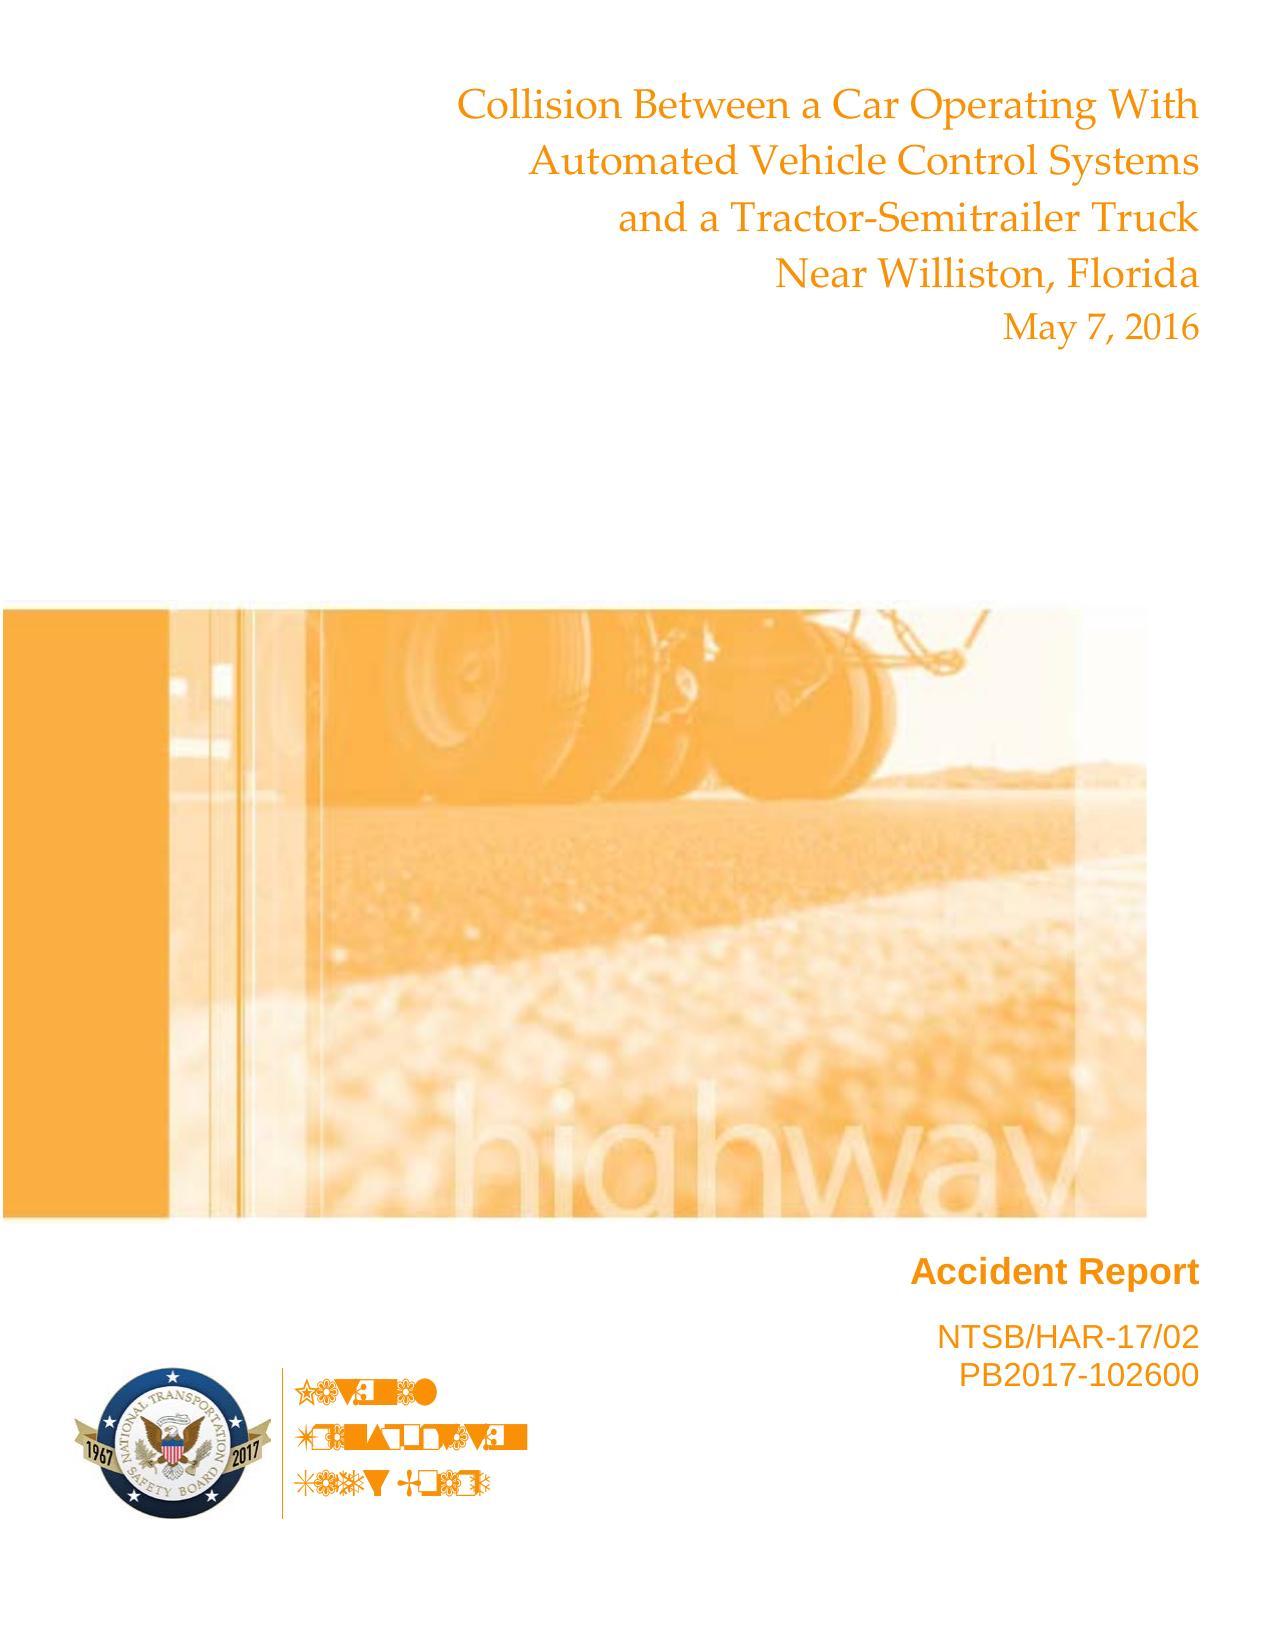 highway-accident-report-collision-between-a-car-operating-with-automated-vehicle-control-systems-and-a-tractor-semitrailer-truck-near-williston-florida-may-7-2016.pdf